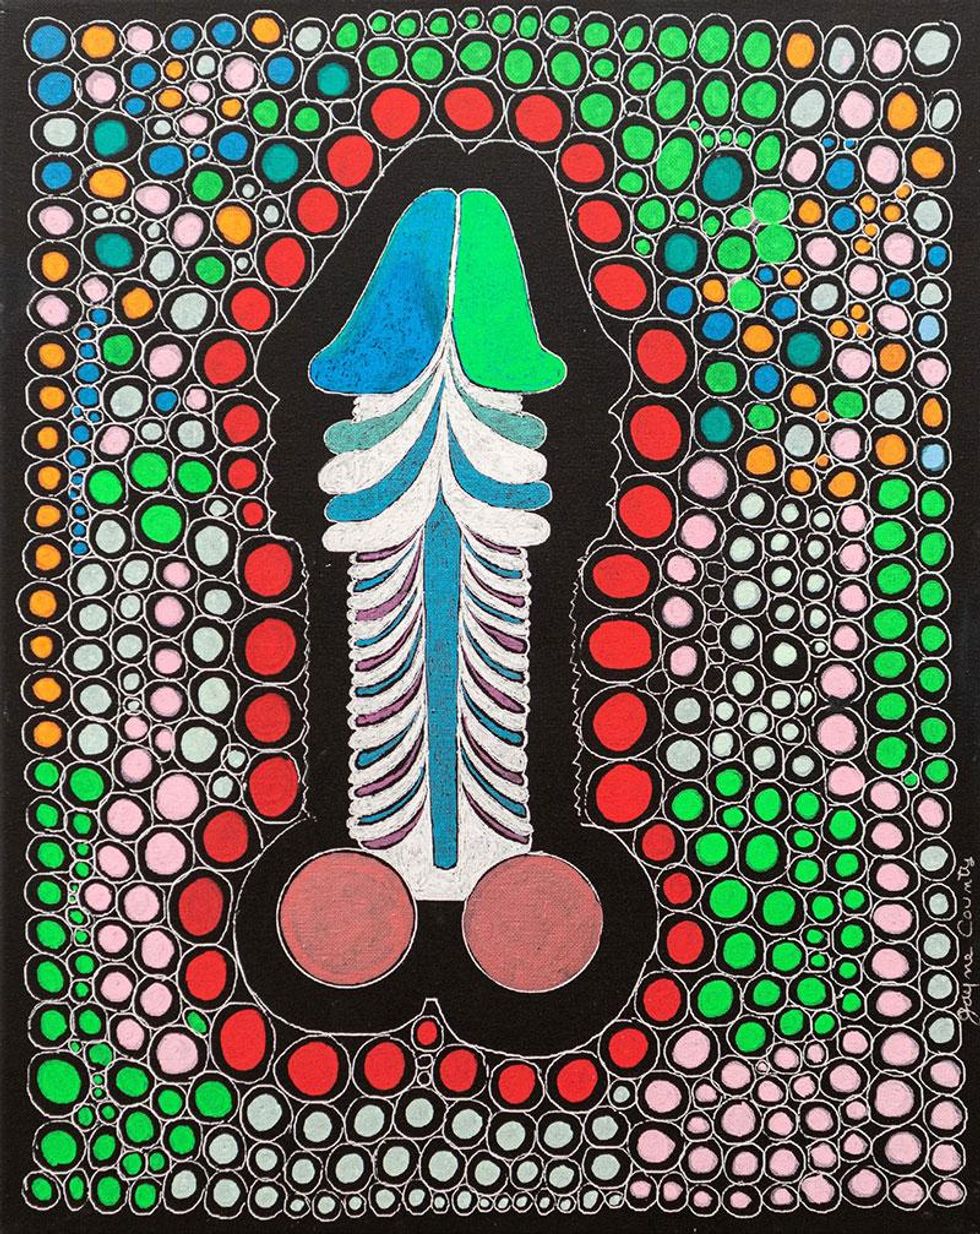 Jayne County, Penis of Hades, 2019, acrylic and ink on canvas, 20 x 16 inches